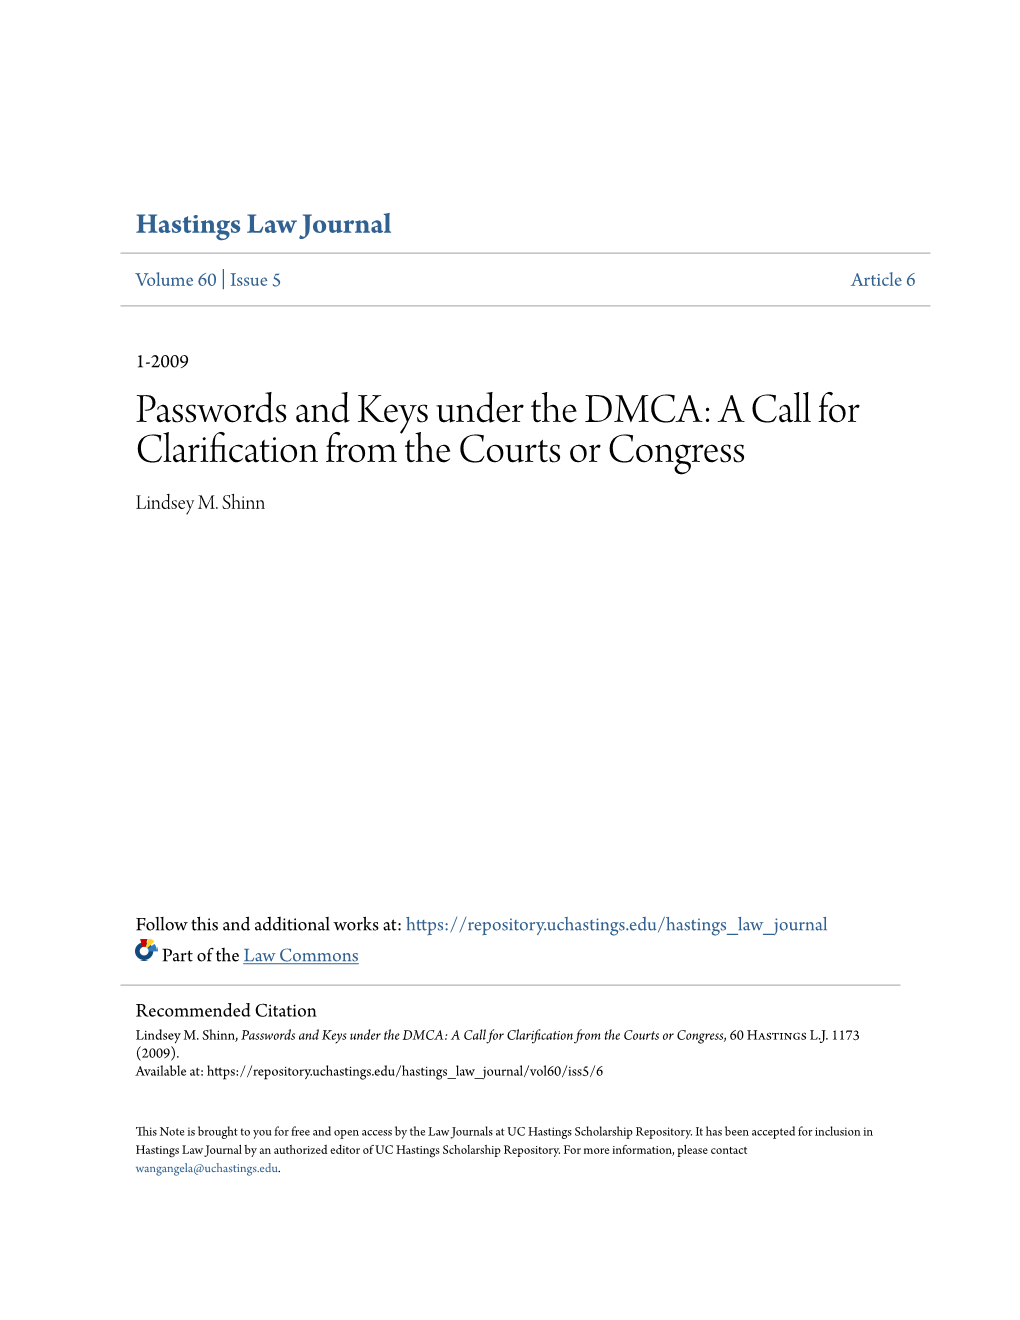 Passwords and Keys Under the DMCA: a Call for Clarification from the Courts Or Congress Lindsey M